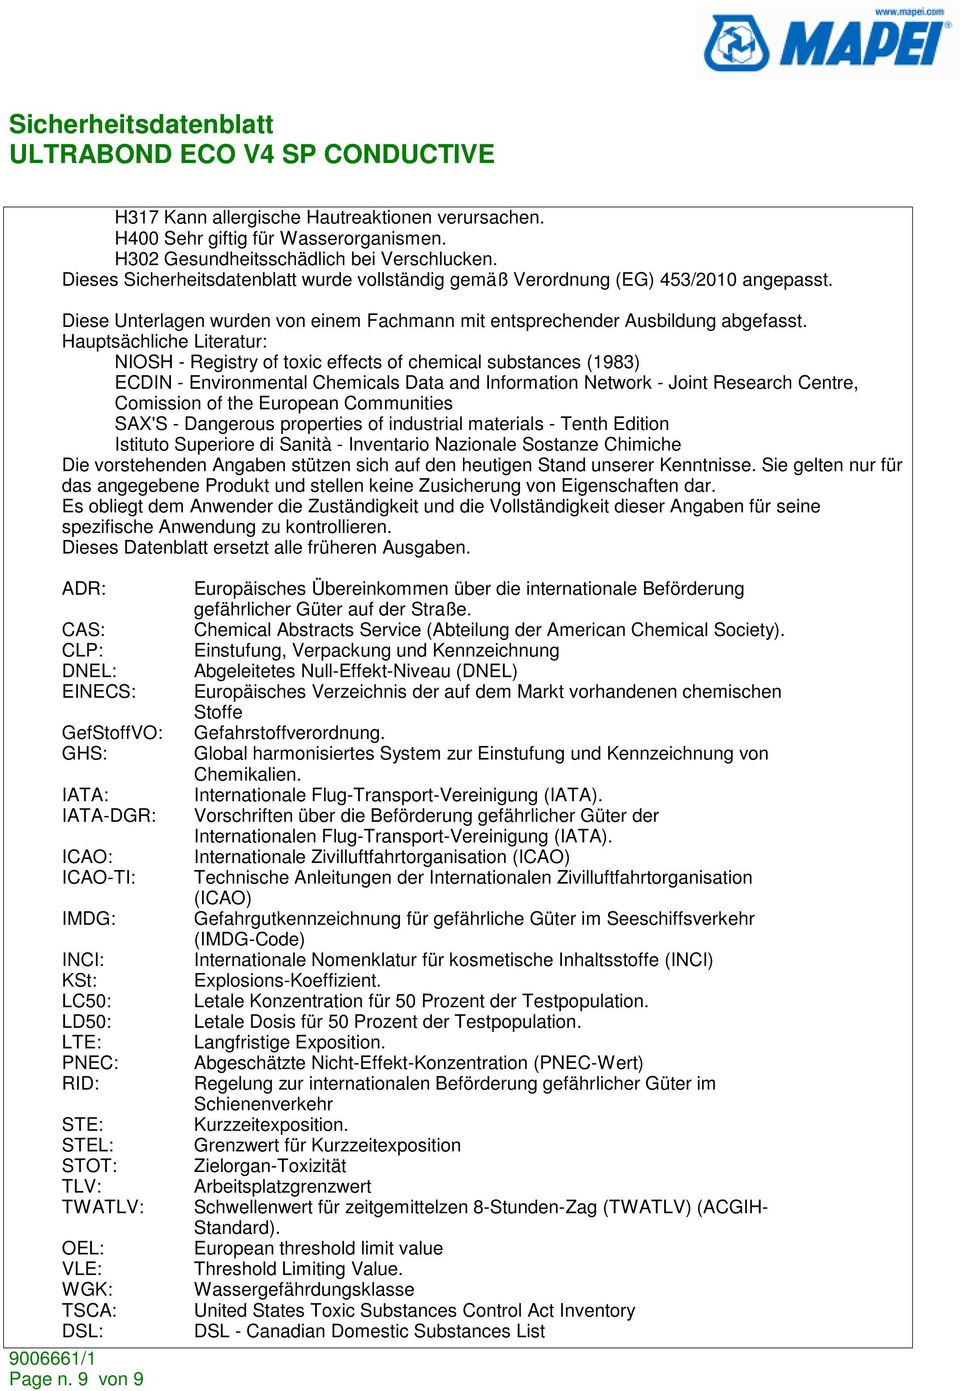 Hauptsächliche Literatur: NIOSH - Registry of toxic effects of chemical substances (1983) ECDIN - Environmental Chemicals Data and Information Network - Joint Research Centre, Comission of the